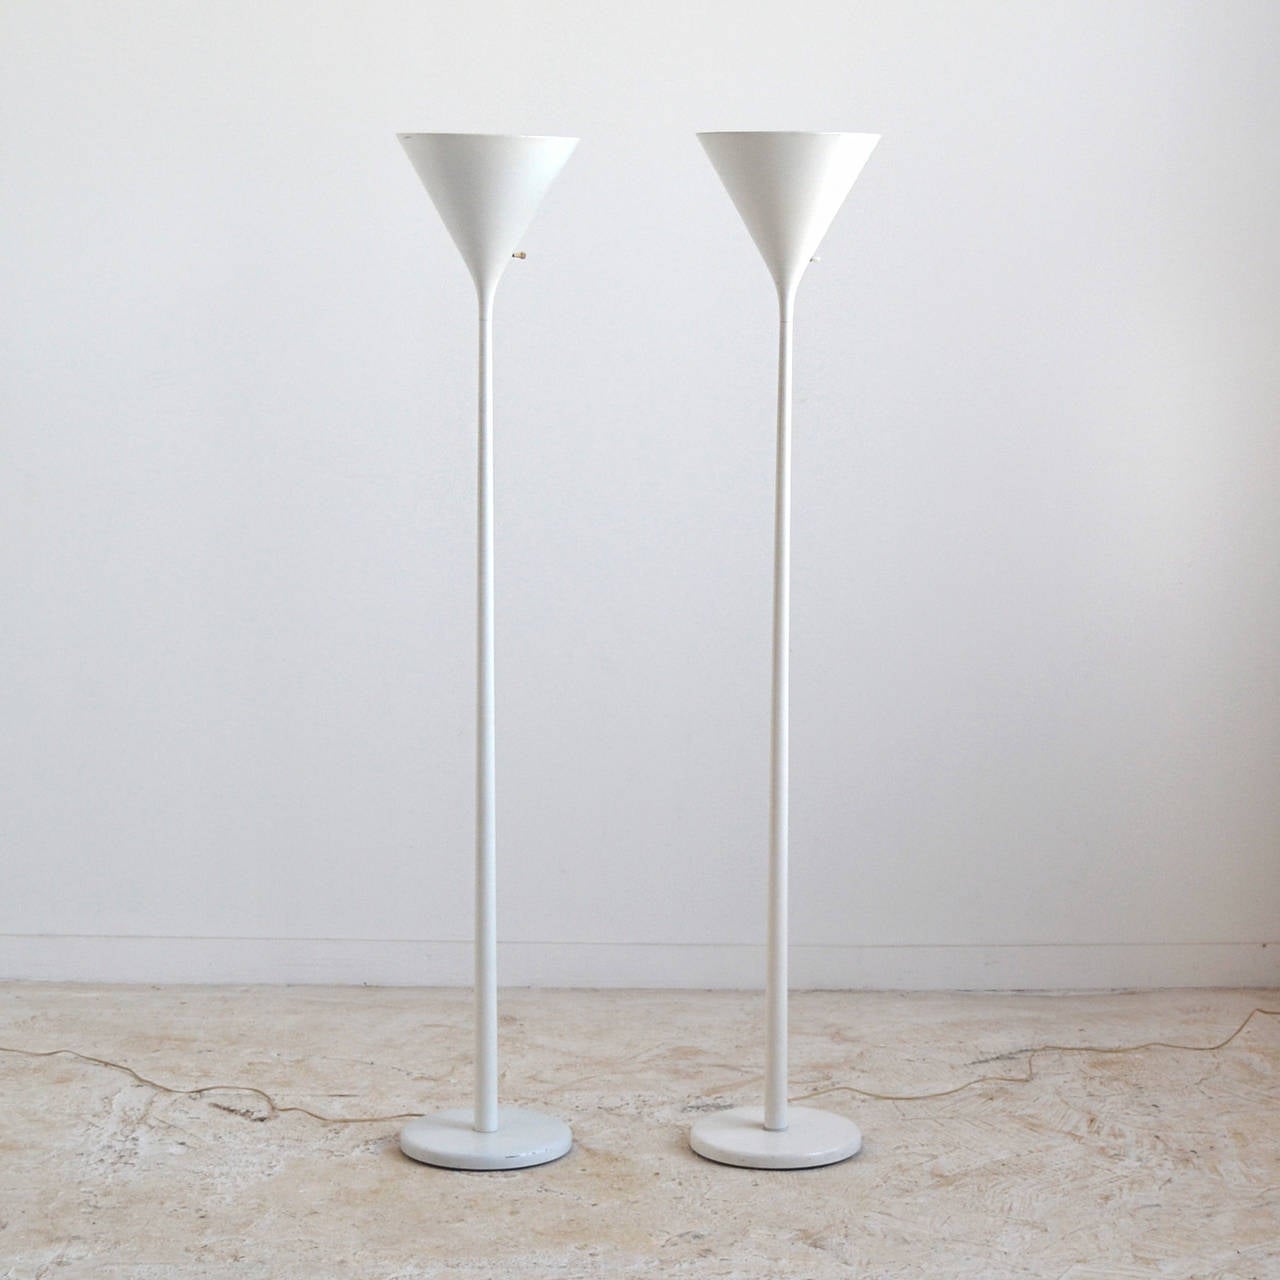 A spare, elegant design, these torchiere lamps by Von Der Lancken & Lundqvist for Nessen have conical shades perched high on a slender rod attached to a circular weighted base. The reflected light they create in a room is some of the most flattering.